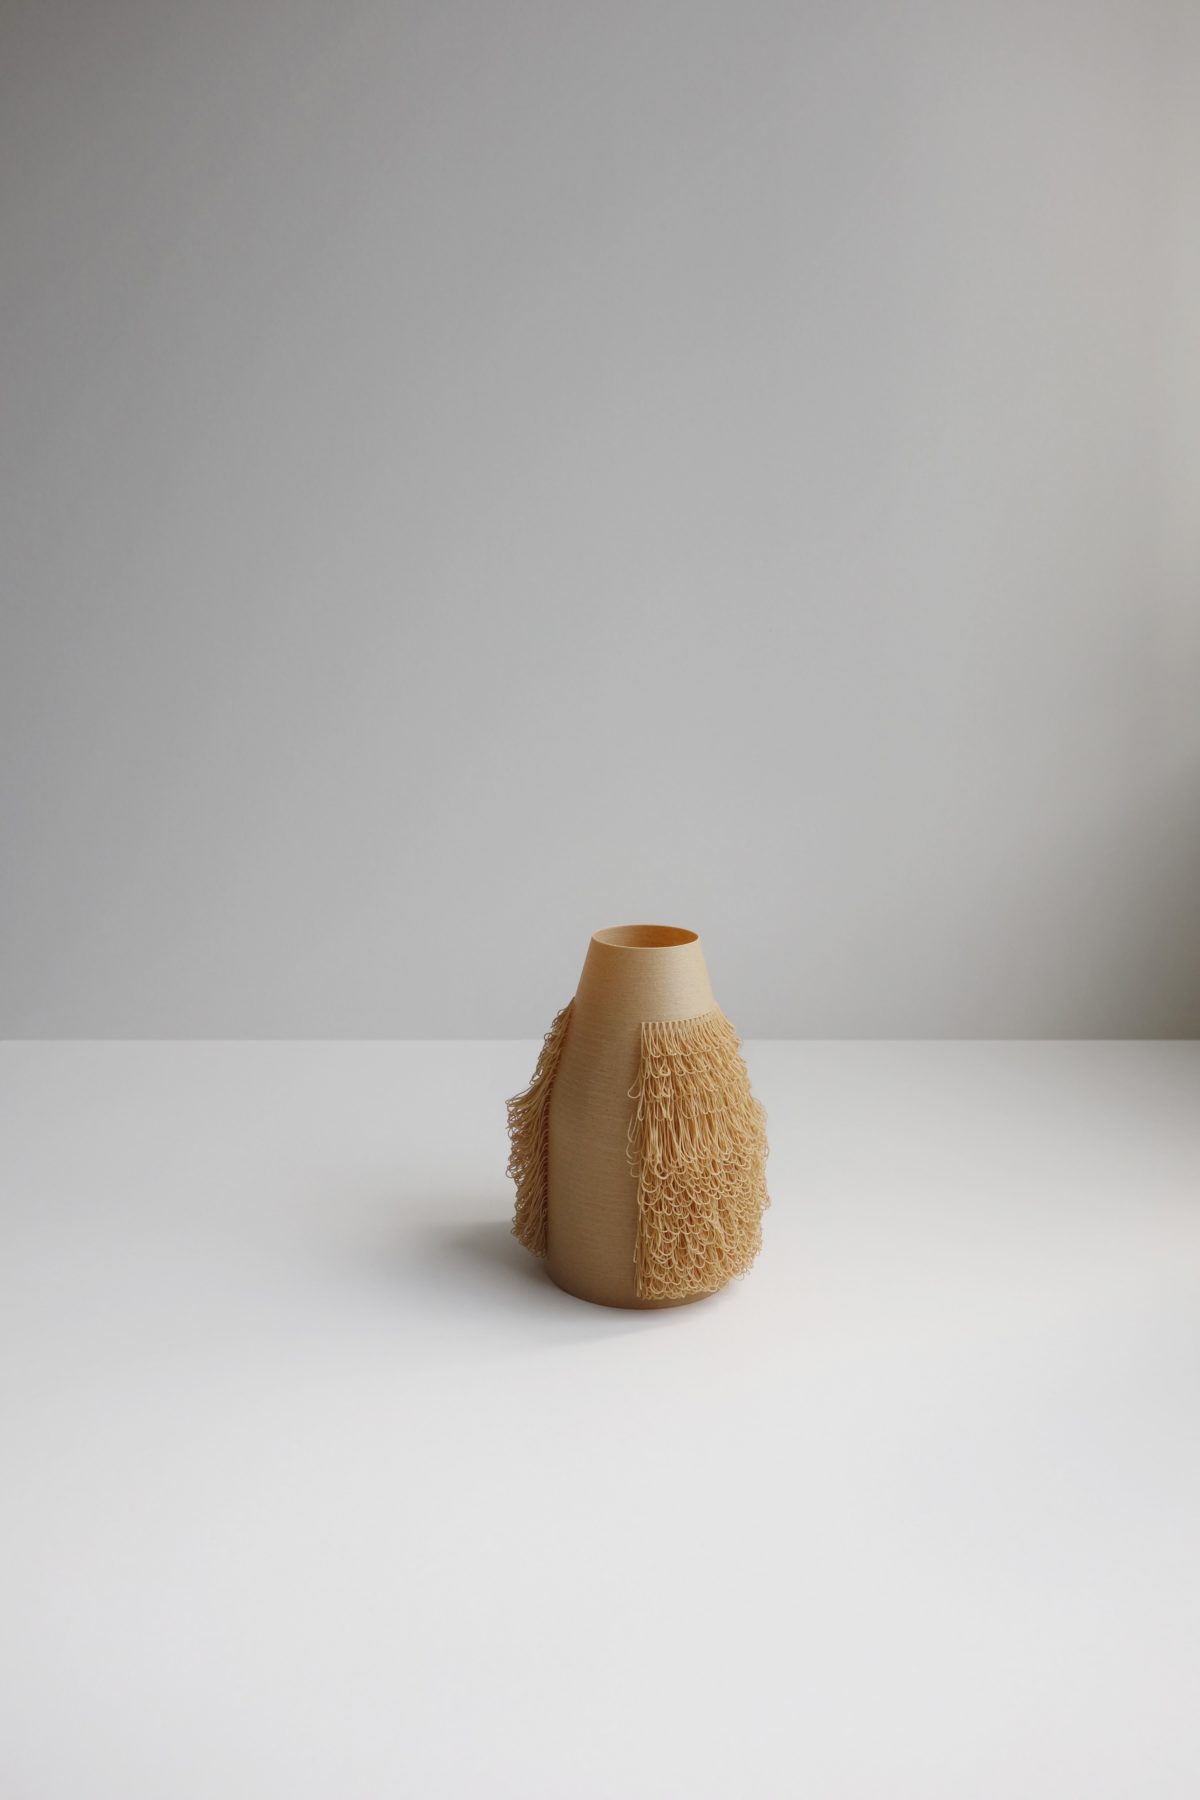 BLOND vase - POILU Collection -
3d printed vases by bold-design for AYBAR Gallery - www.bold-design.fr